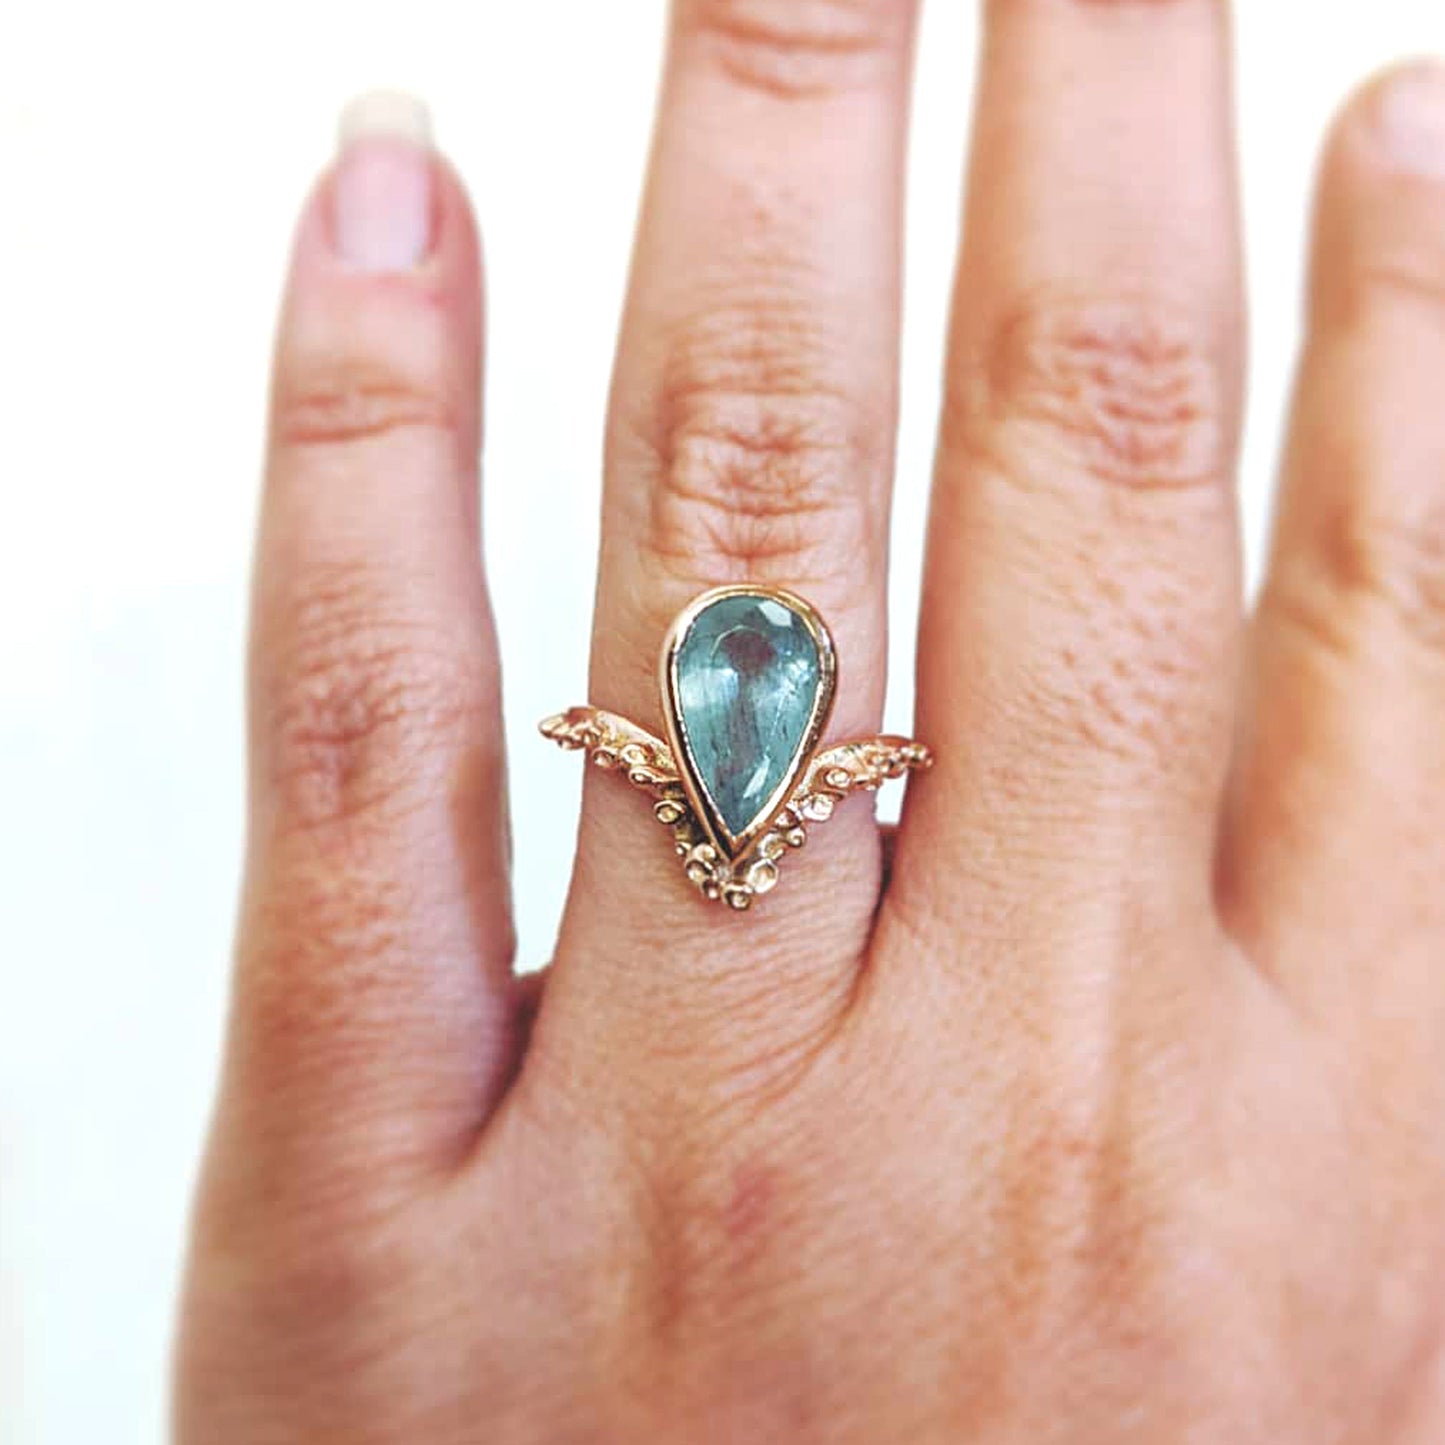 Full view of Piper Ring. This ring is made of gold, features a teardrop shaped moss aquamarine bezel set with Katie's signature seasponge texture surrounding the tip of the teardrop and continuing on the band.